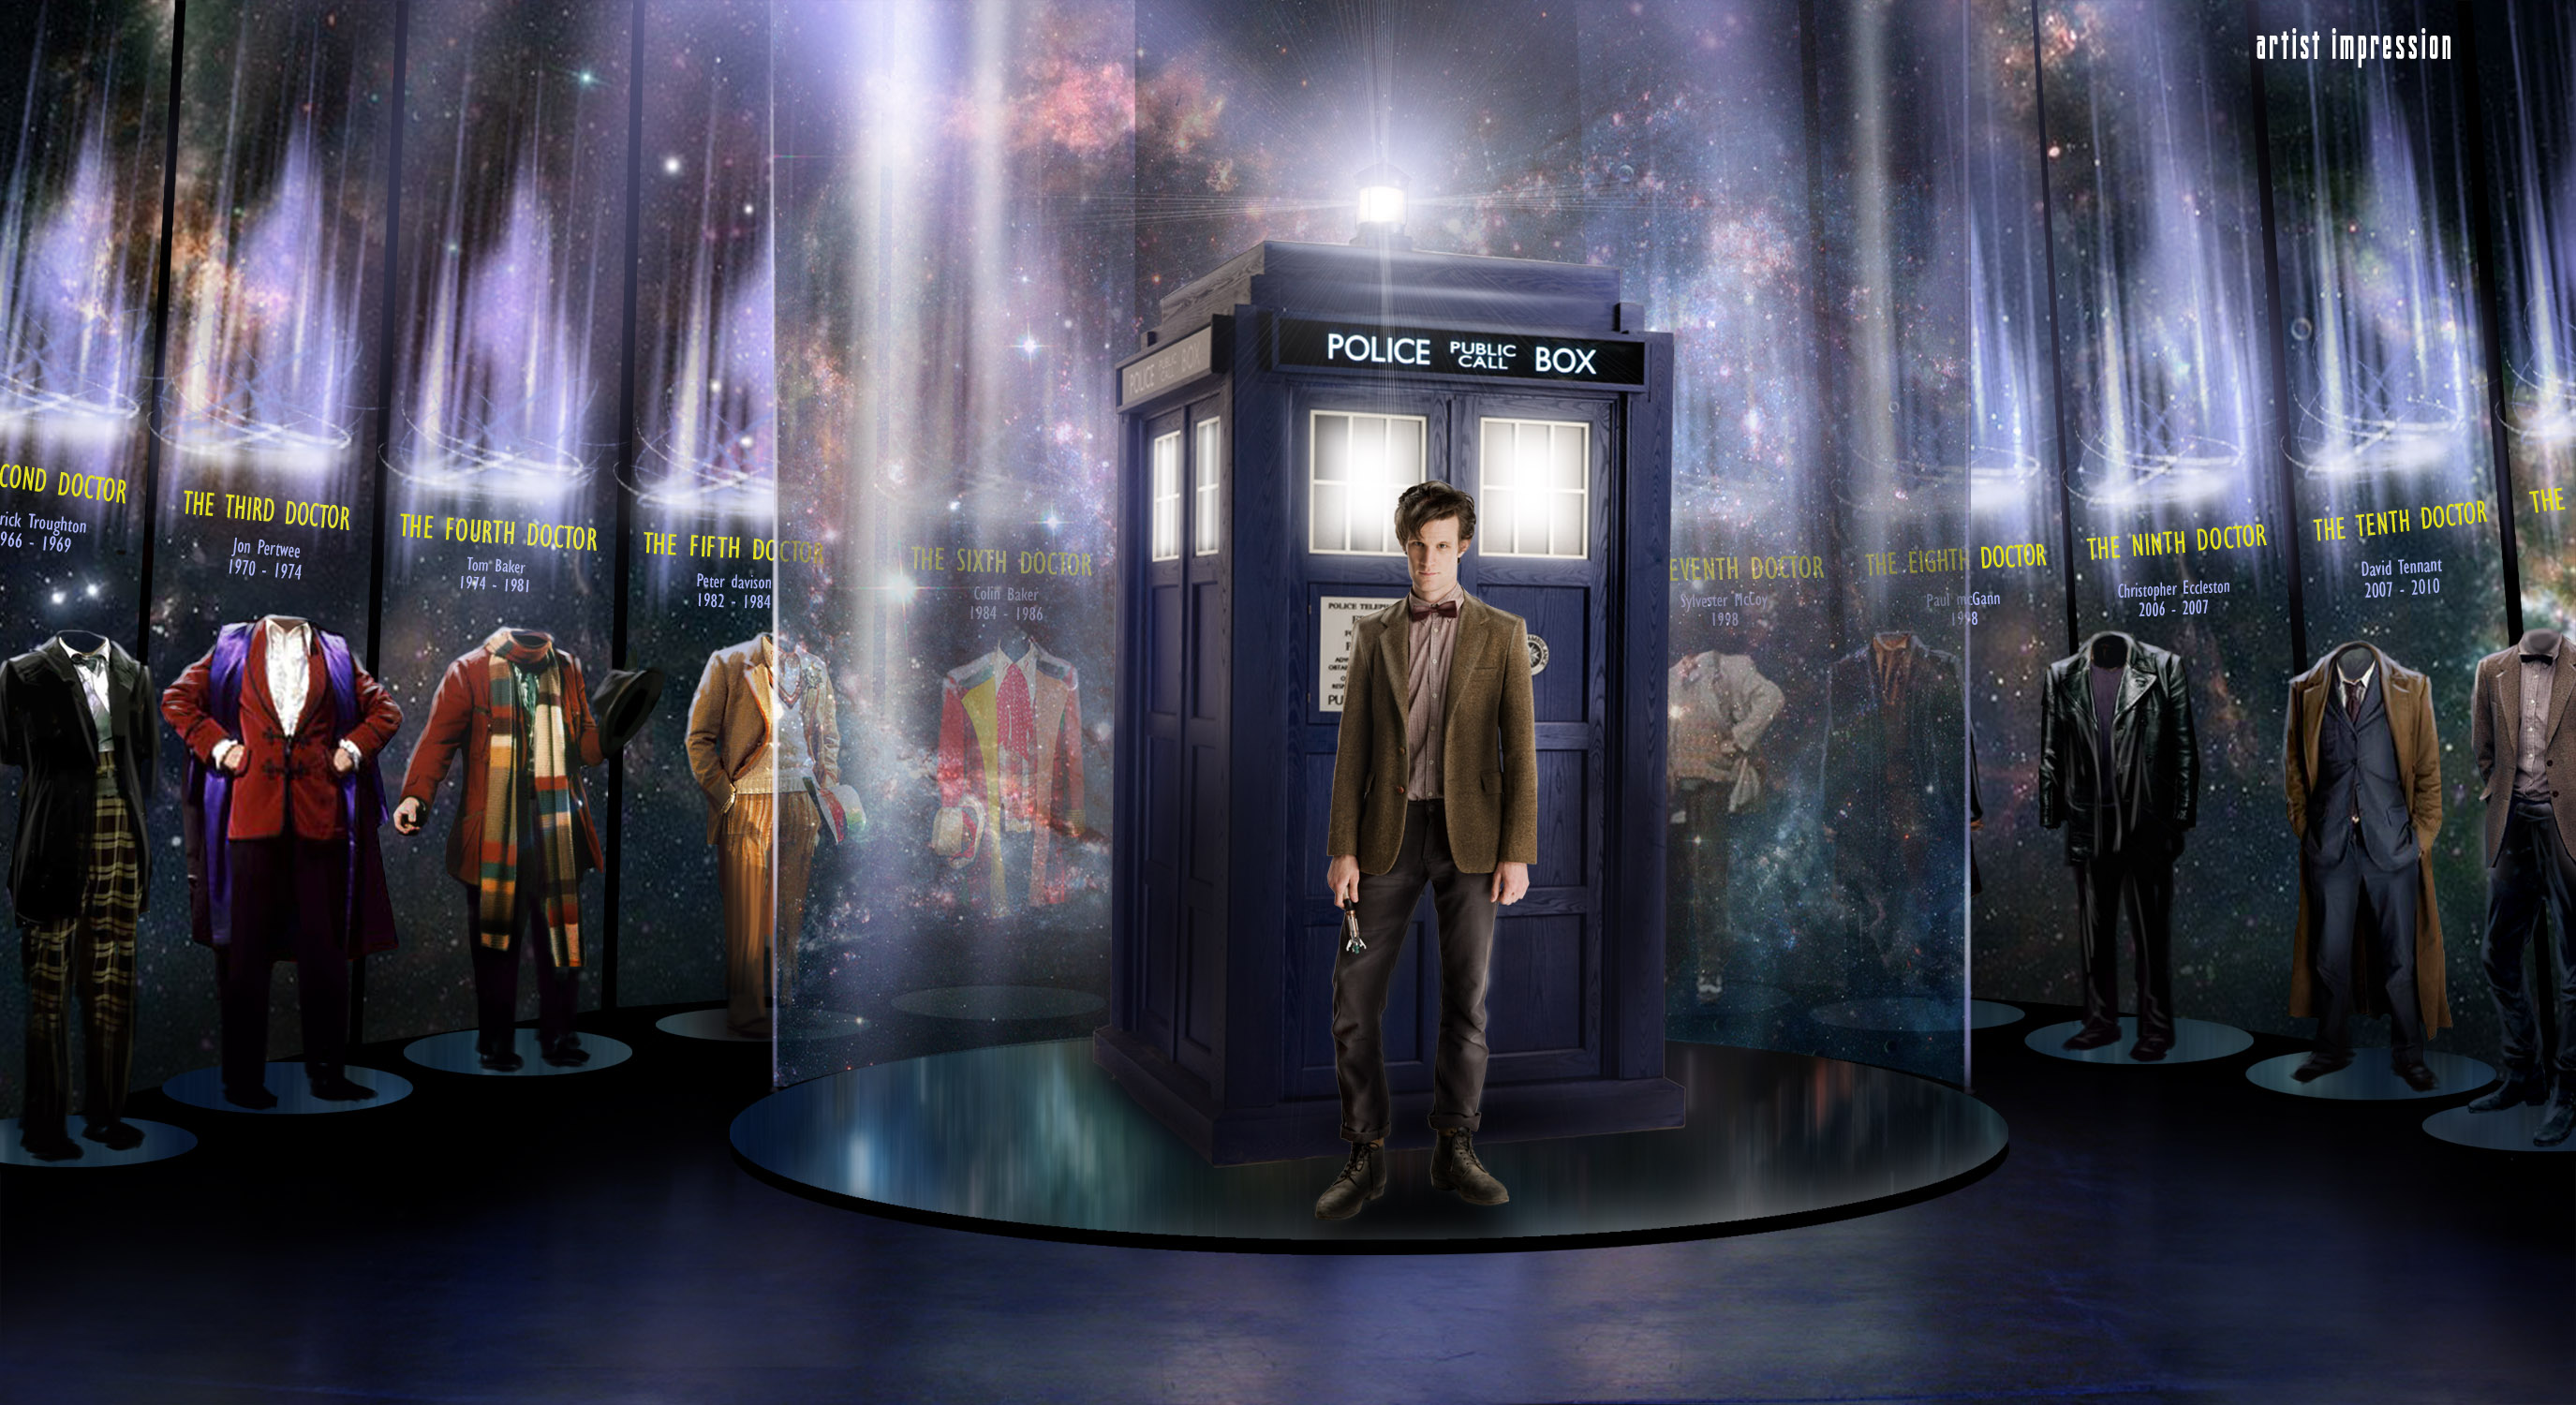  wallpapers of Doctor Who You are downloading Doctor Who wallpaper 27 2750x1500